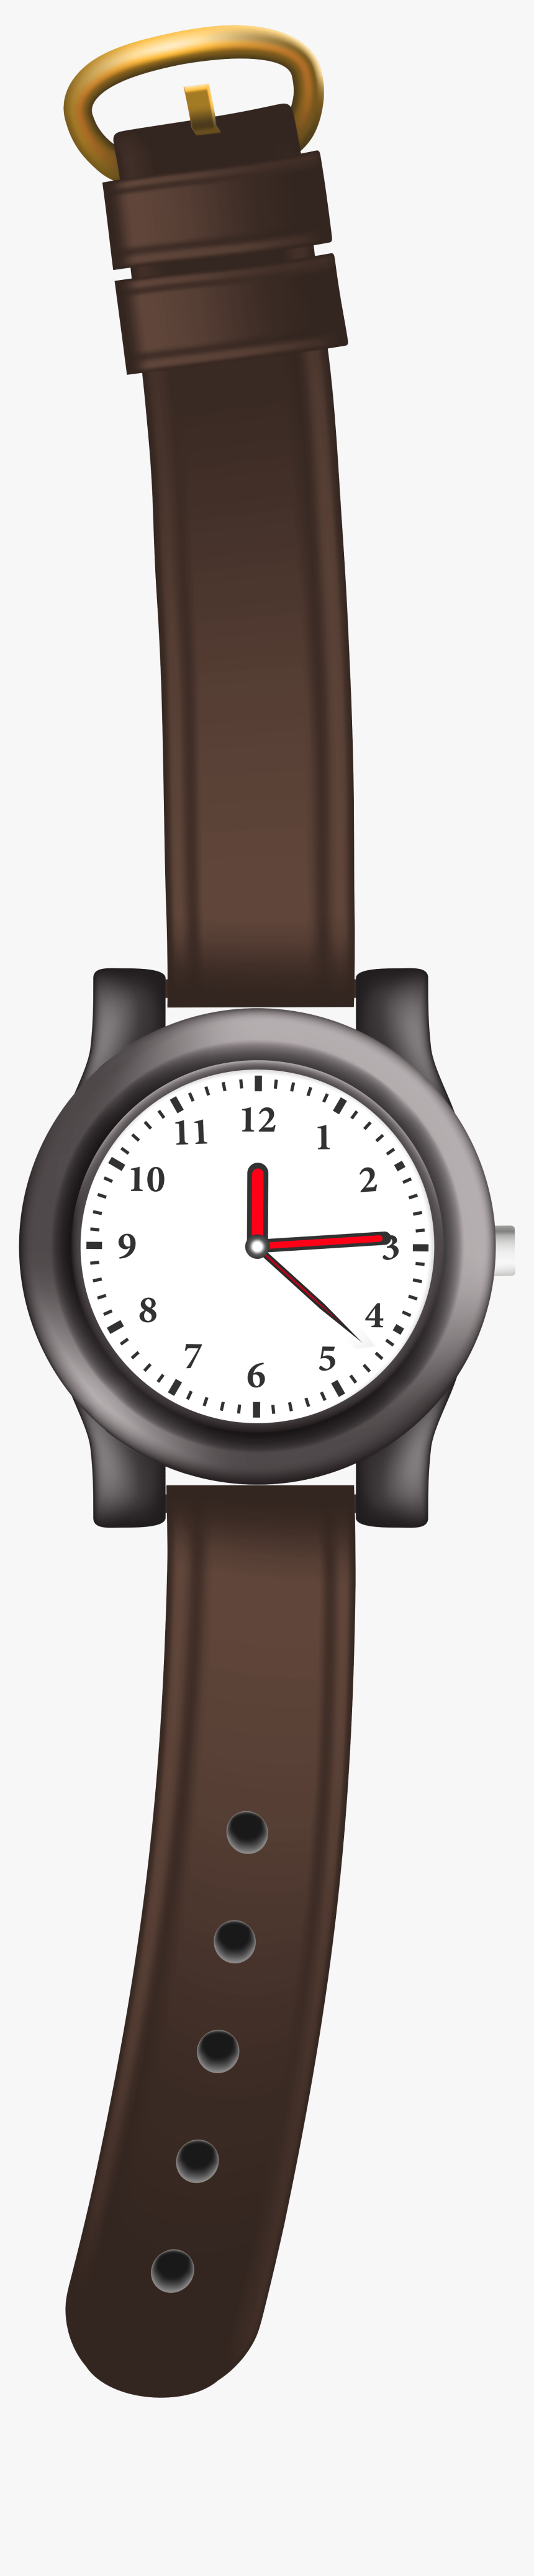 Leather Wach Png Clip Art - Analog Watch, Transparent Png, Free Download